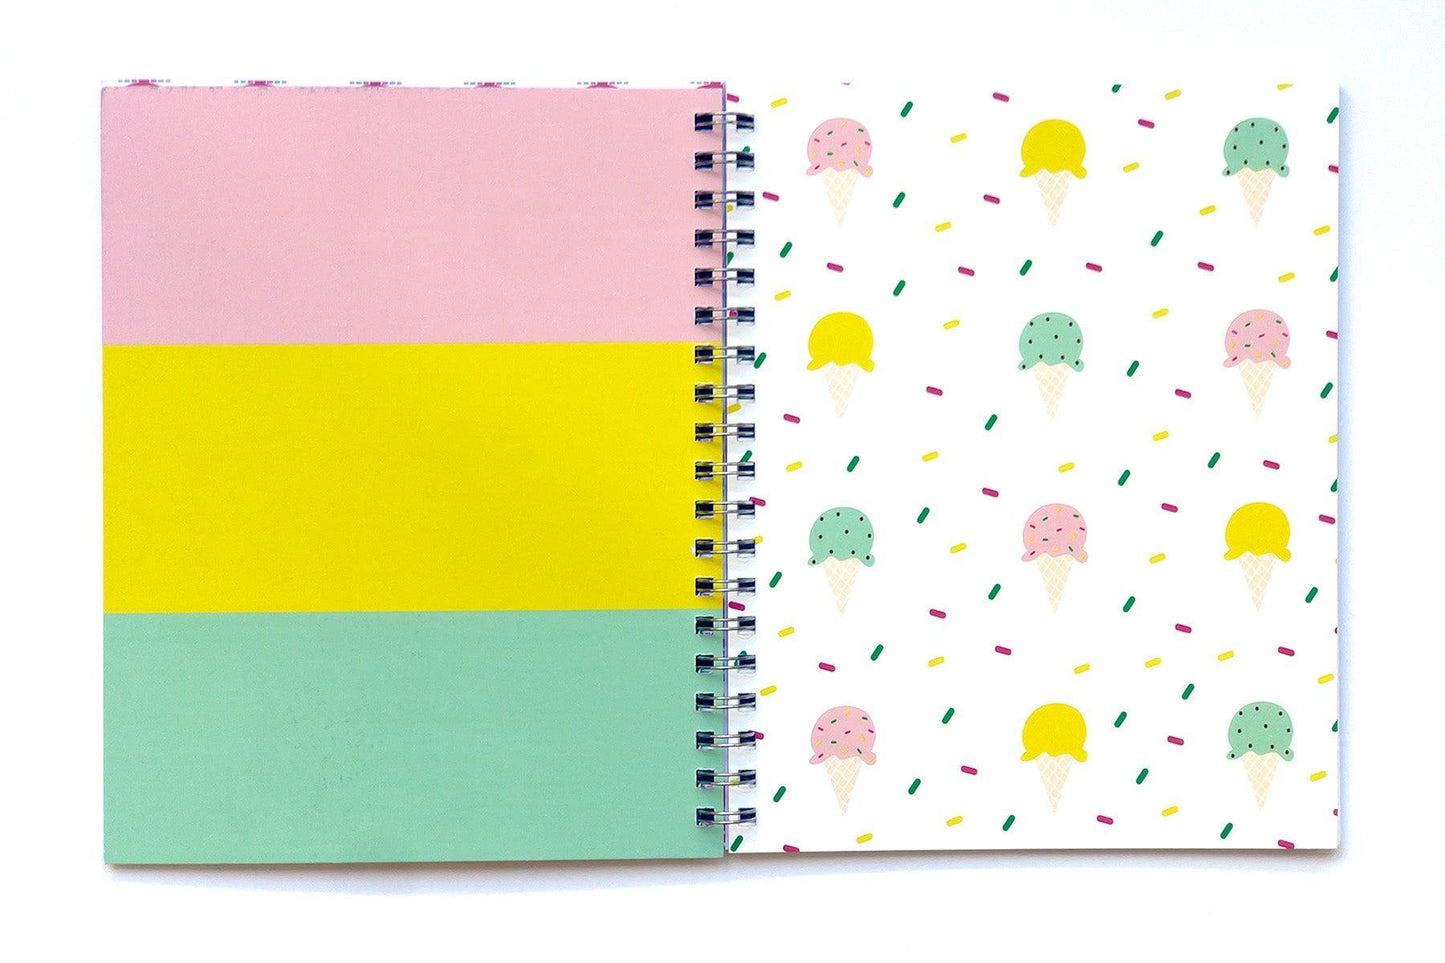 Ice Cream with Sprinkles Journal – front cover features a yummy and adorable ice cream pattern with rainbow sprinkles in the background. Back cover has solid large stripes in pink, yellow, and green.